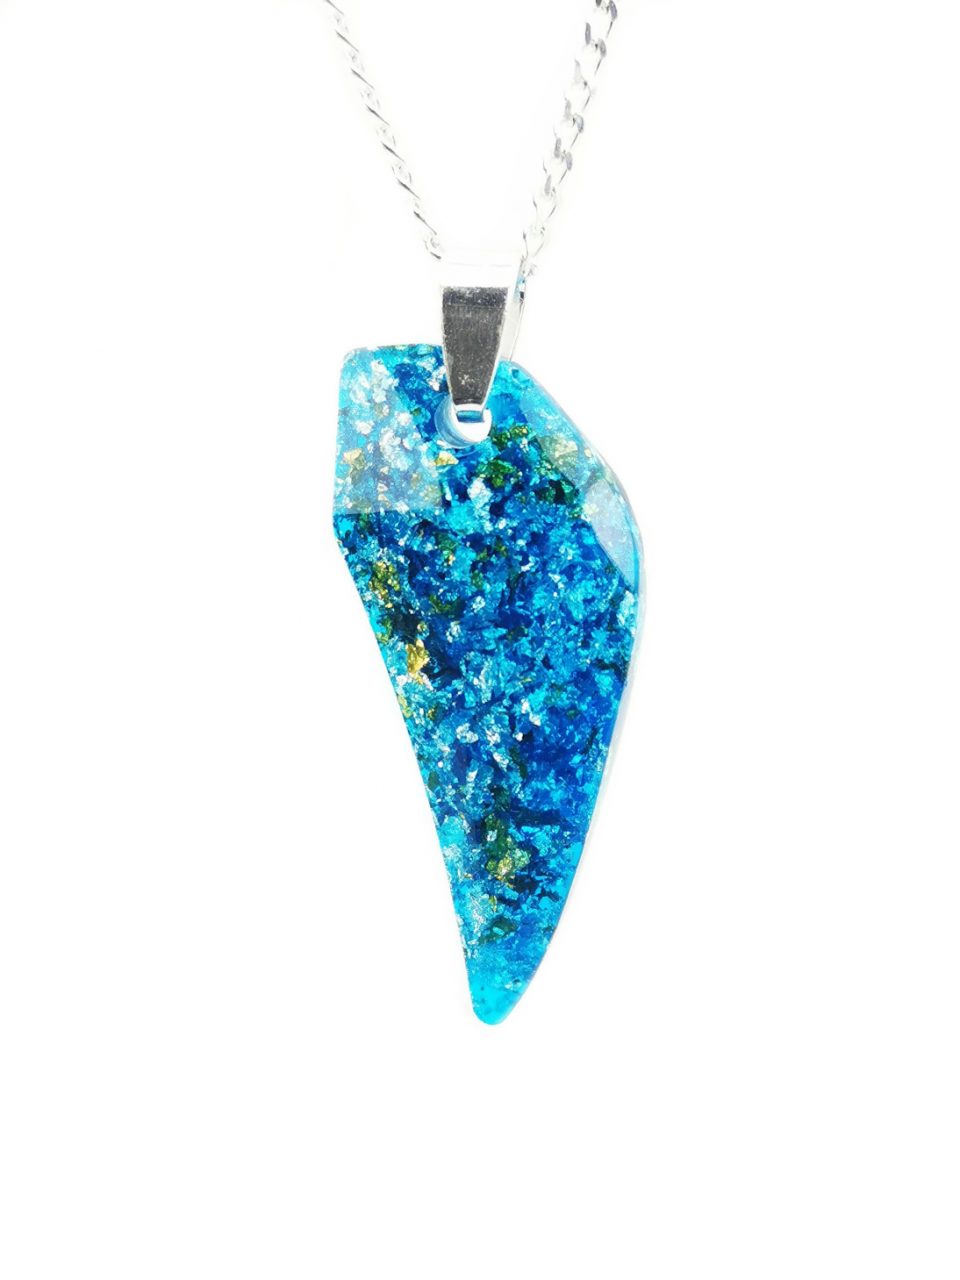 Blue Wing Orgone Pendant by OrgoneVibes